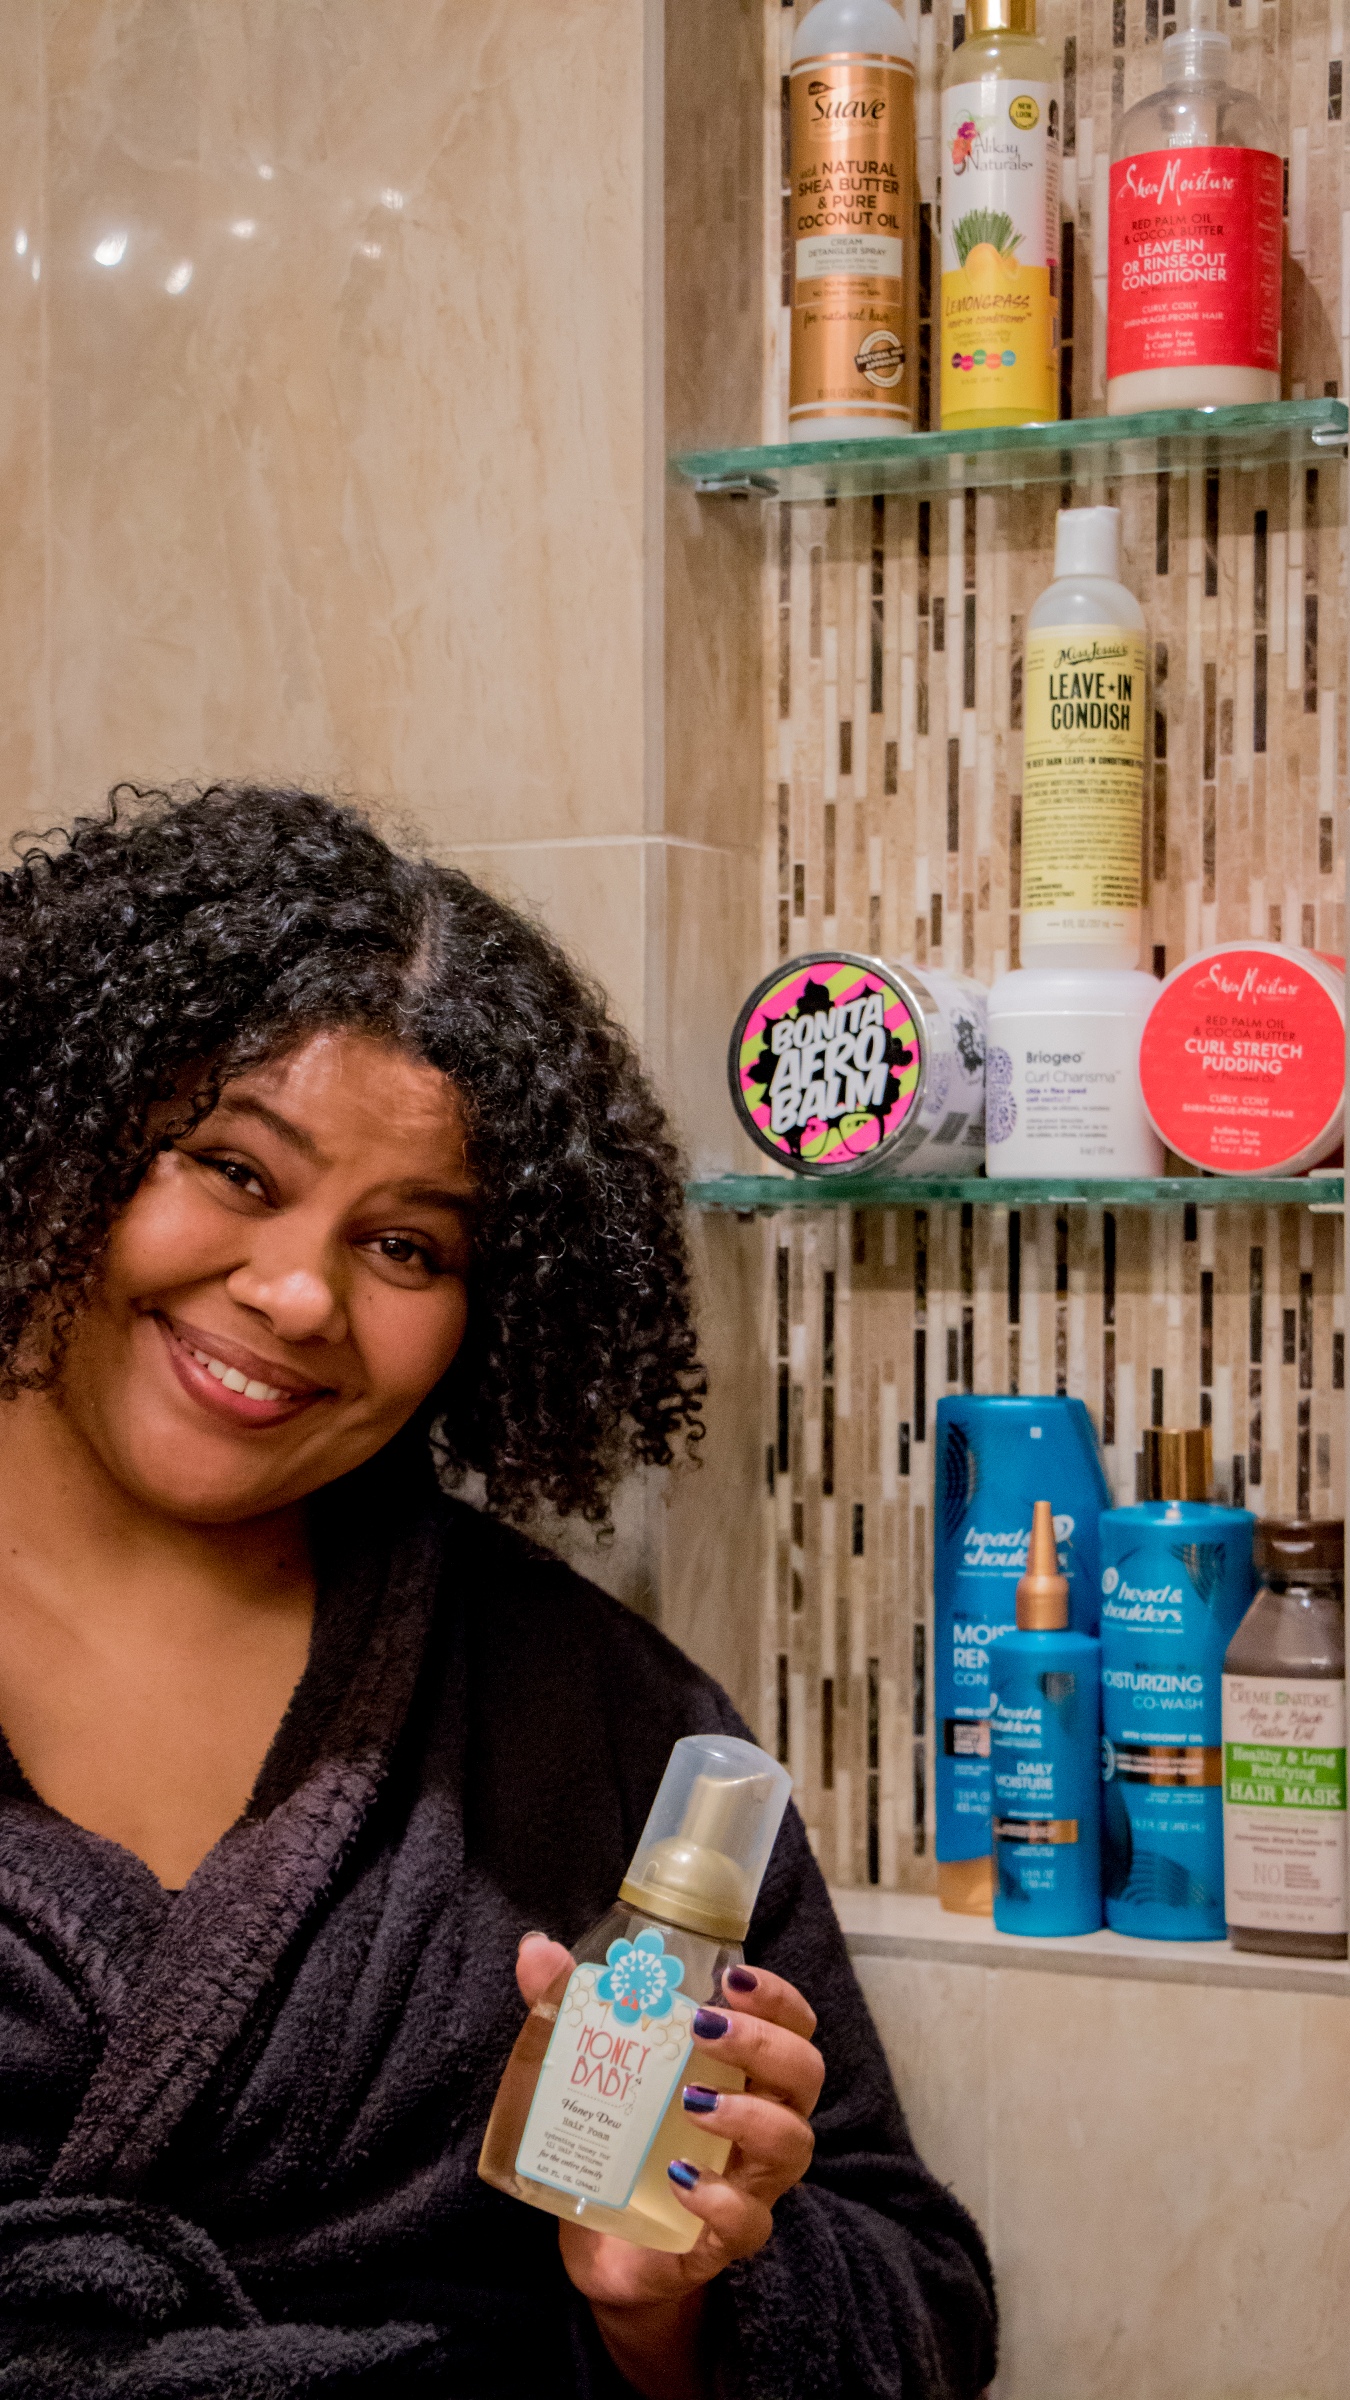 Fall to Winter Haircare – Everything I Need Is at Walmart’s The Curl Shop!